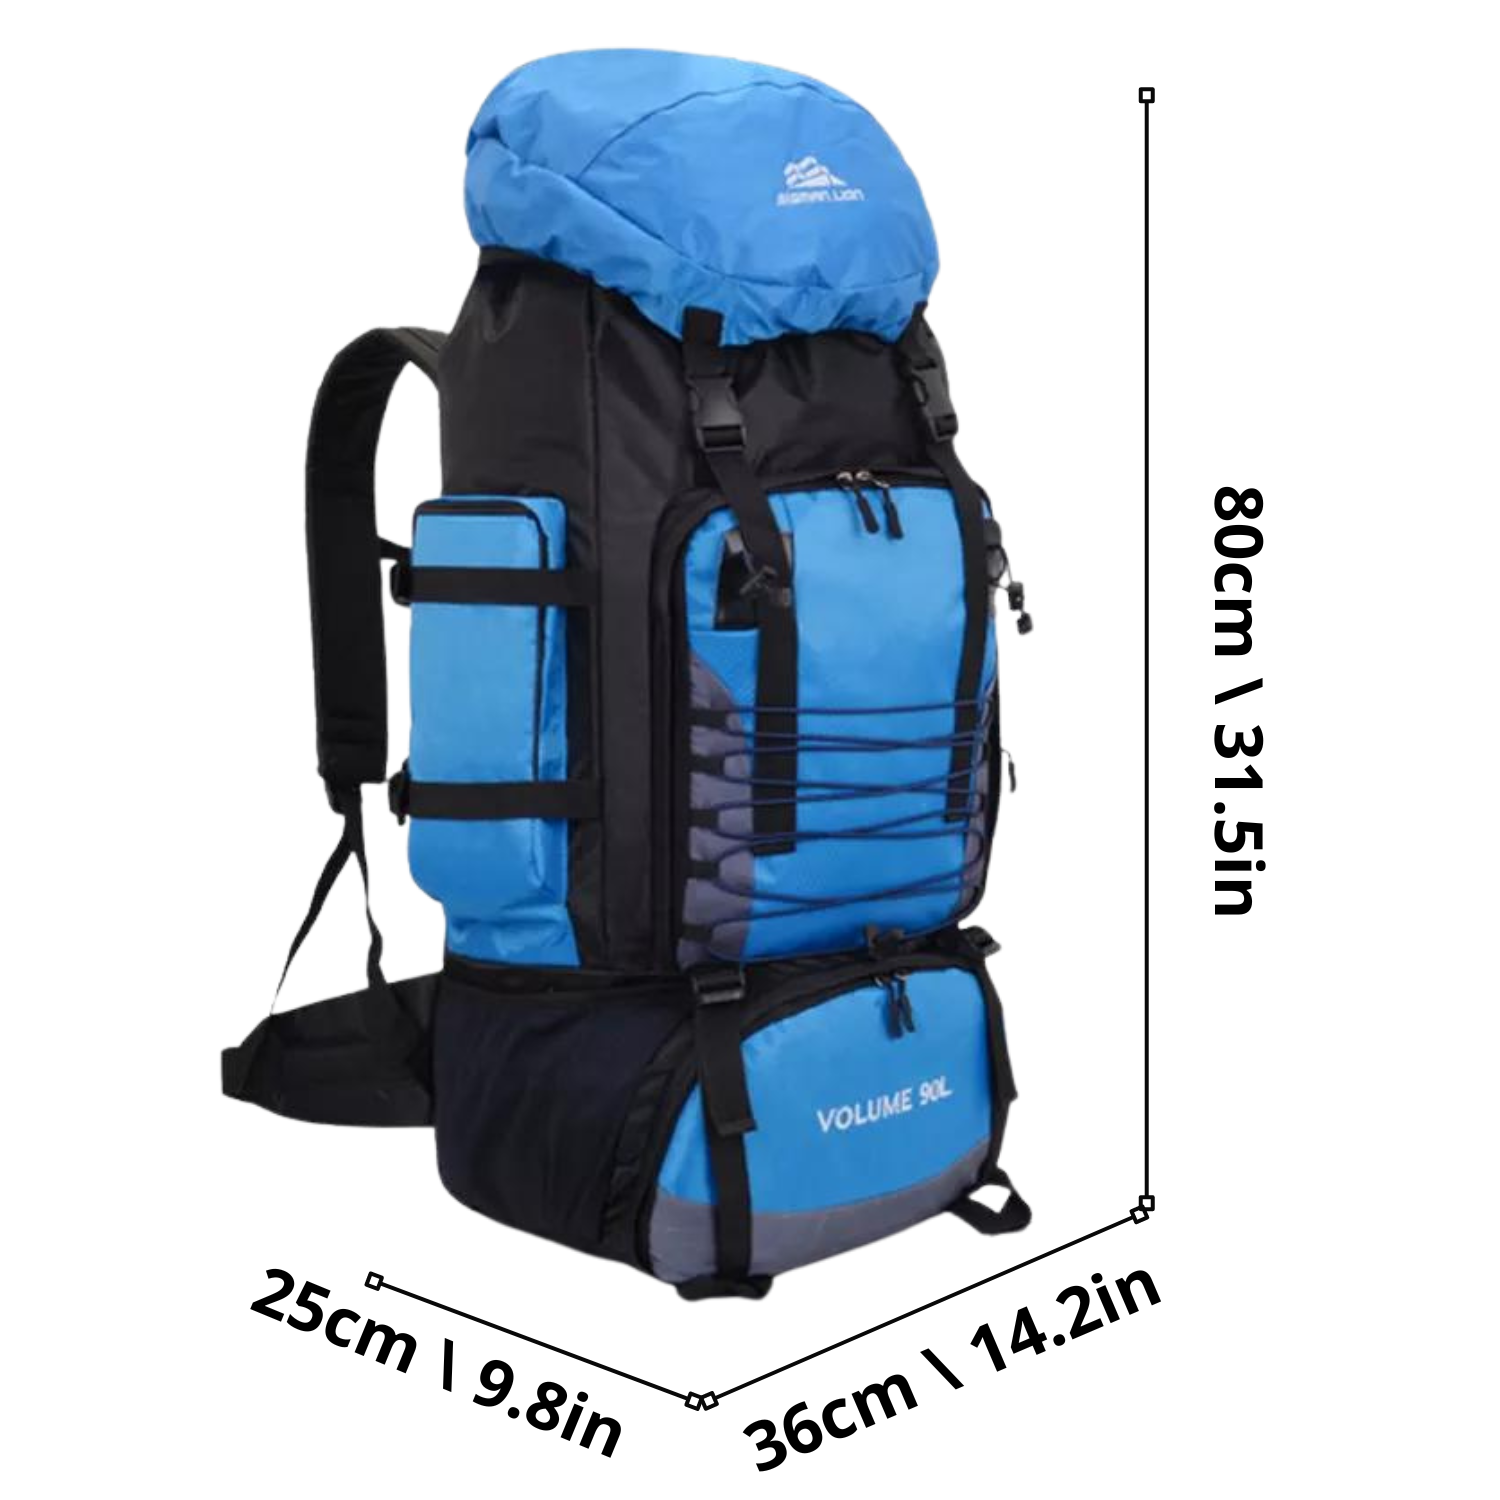 Expedition-Ready 90L Outdoor Backpack for All-Terrain Adventures